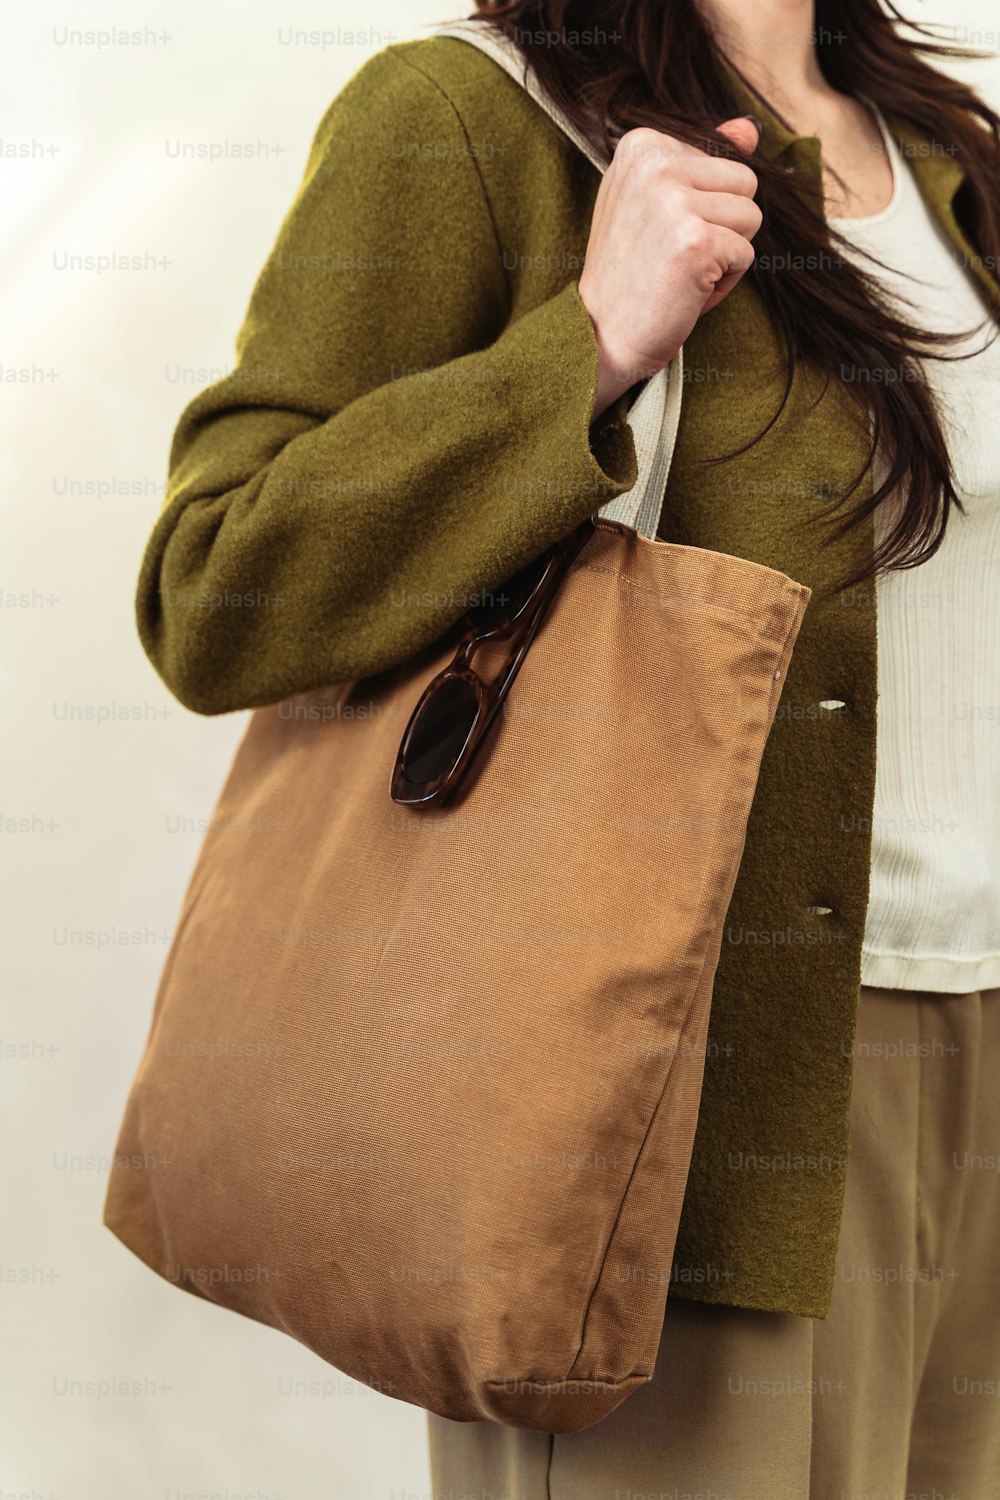 a woman holding a brown bag in her hands